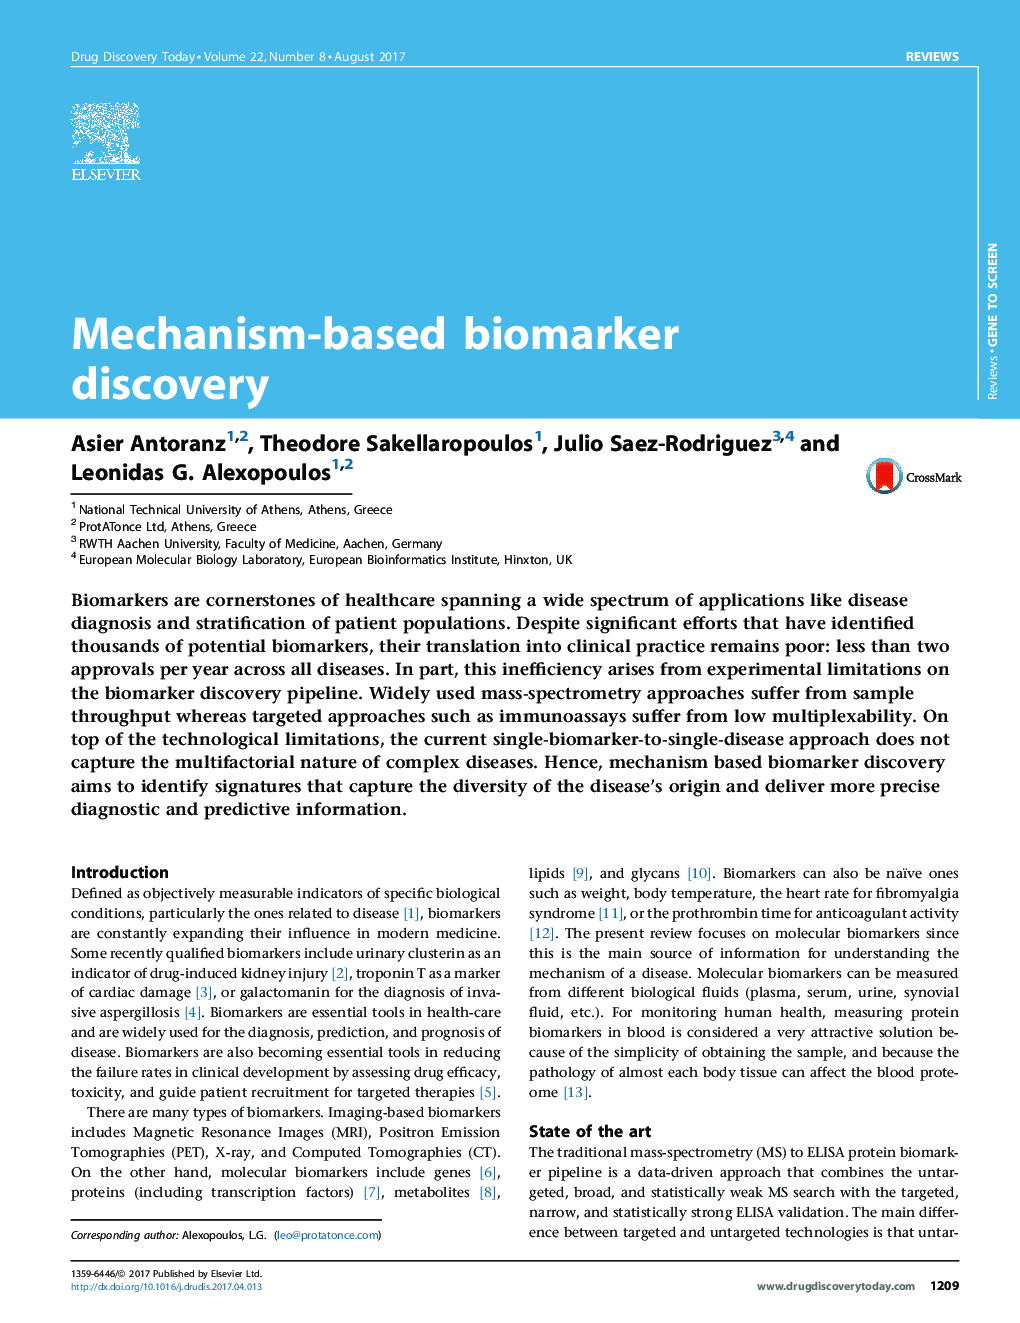 ReviewGene to screenMechanism-based biomarker discovery